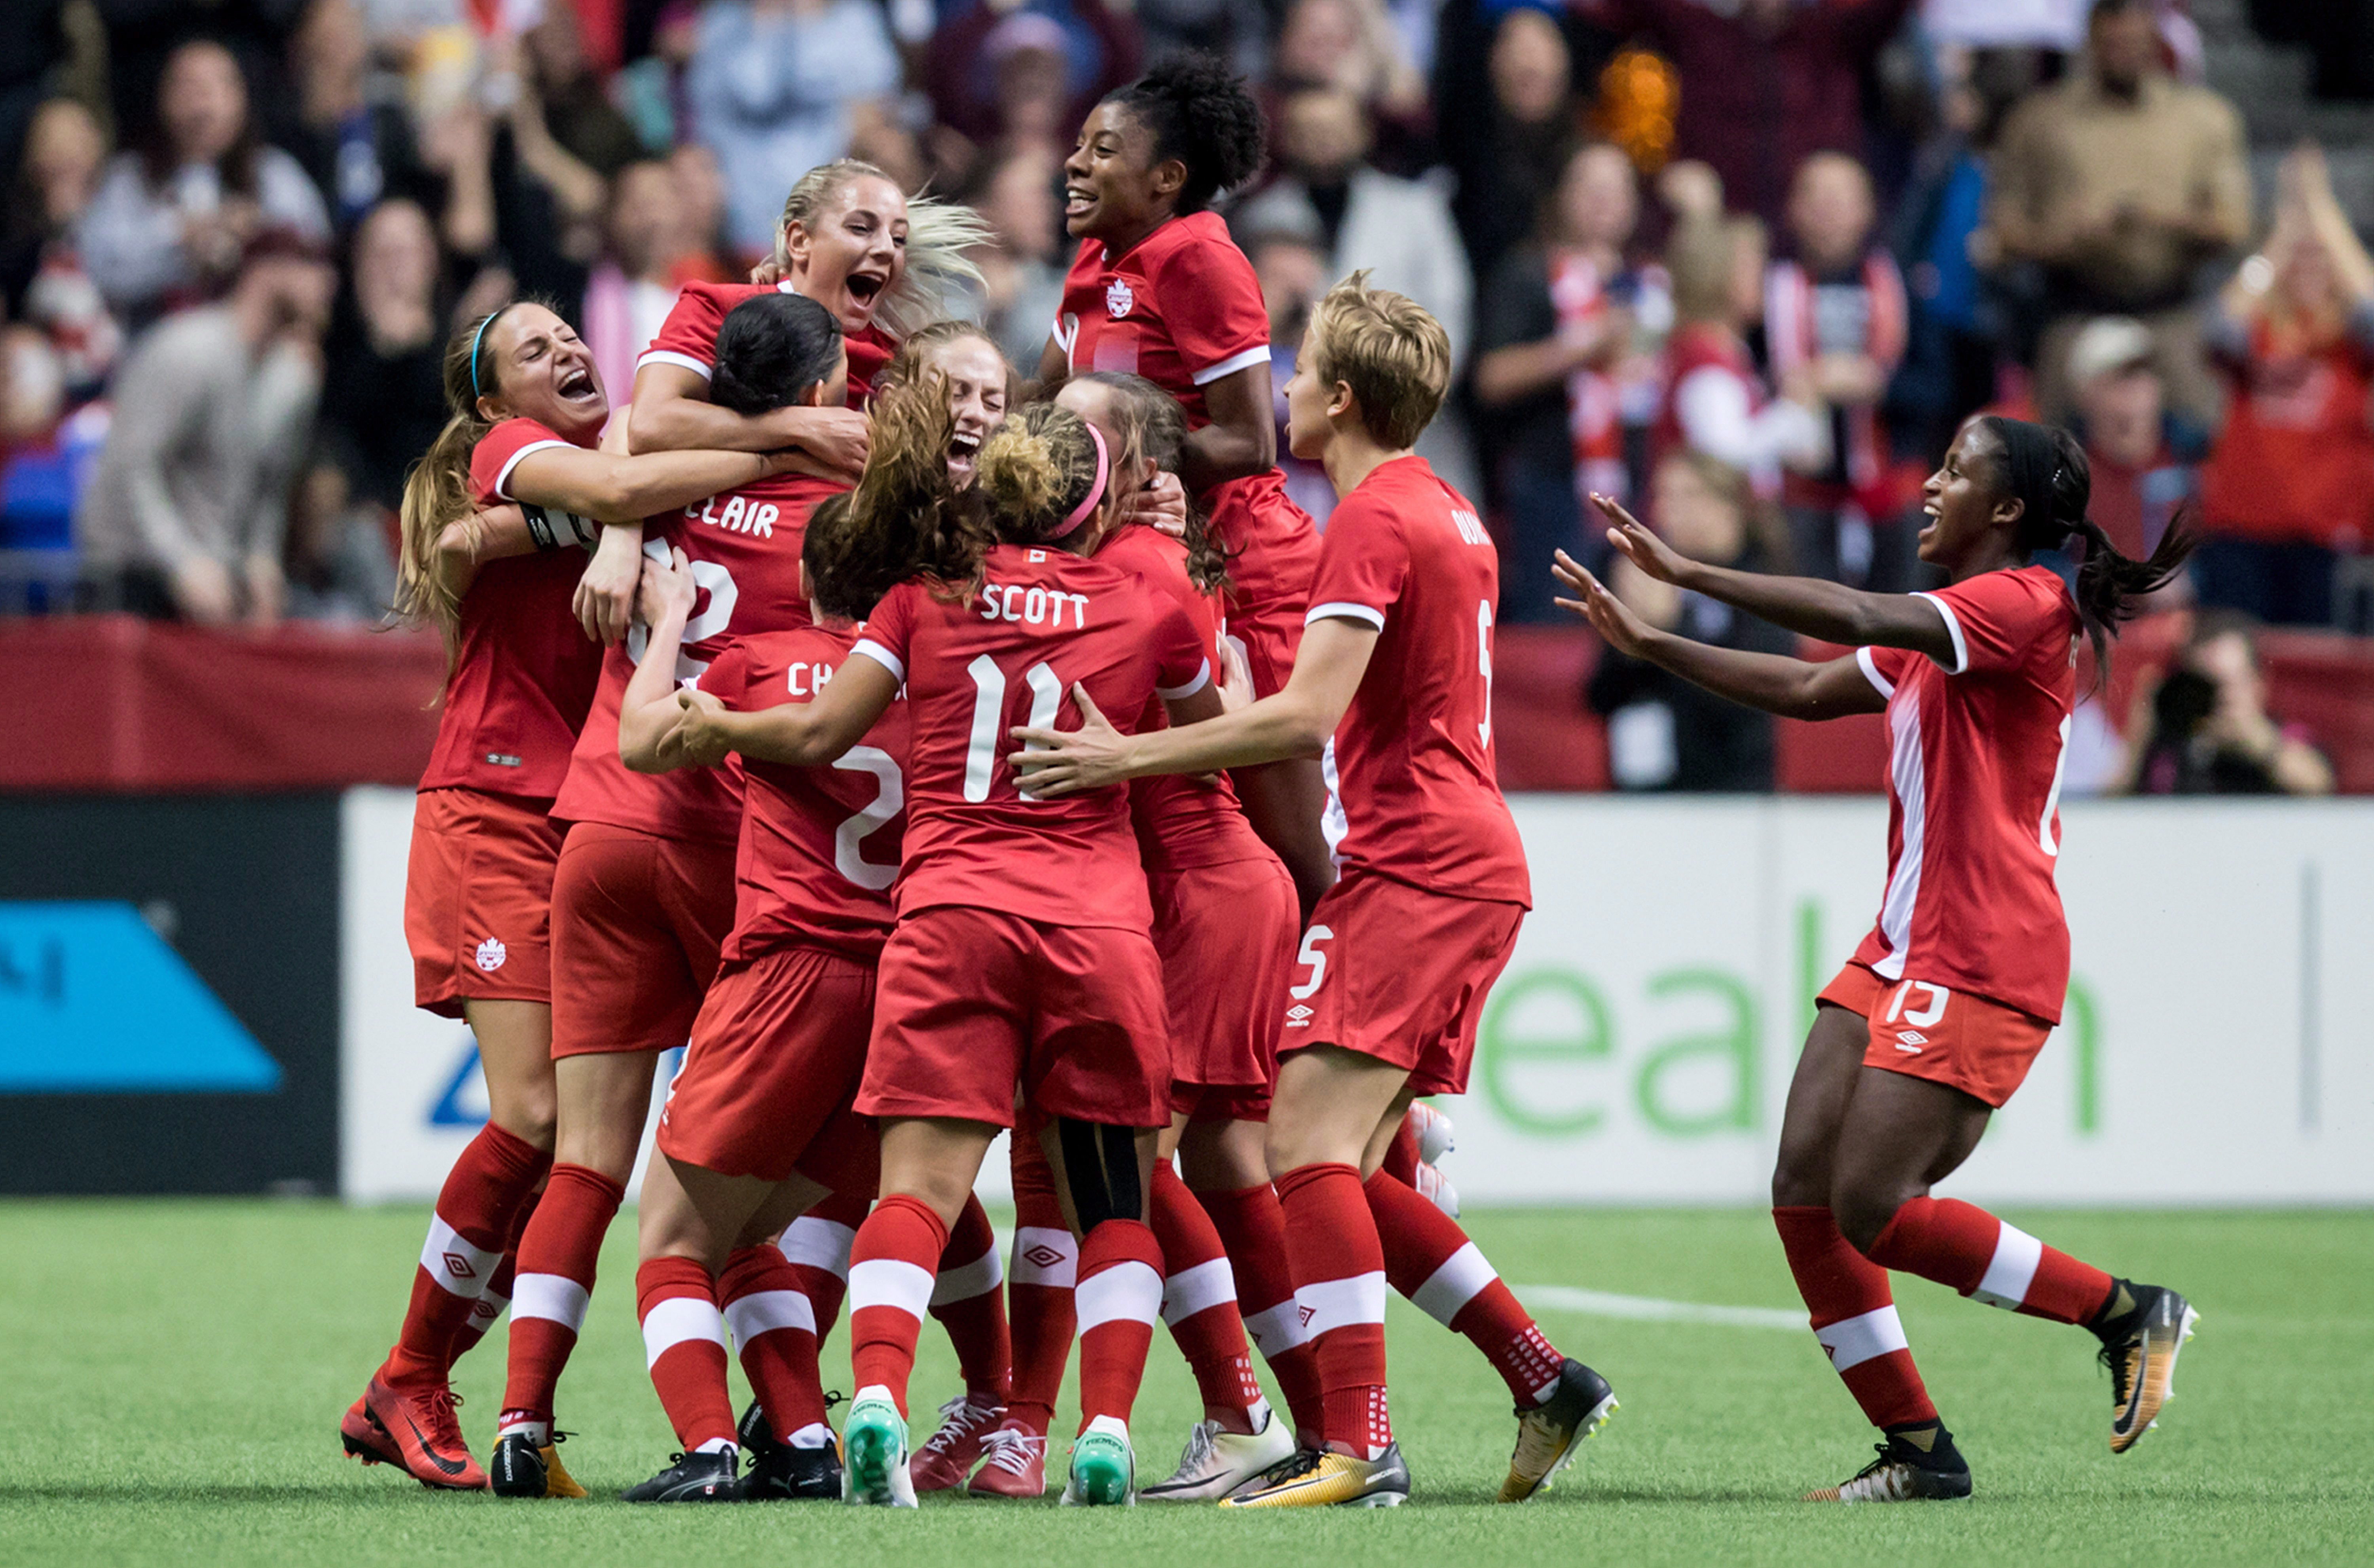 Olympia 1.OS Gold 2020 Foto signiert Erin MCLEOD Fussball CAN